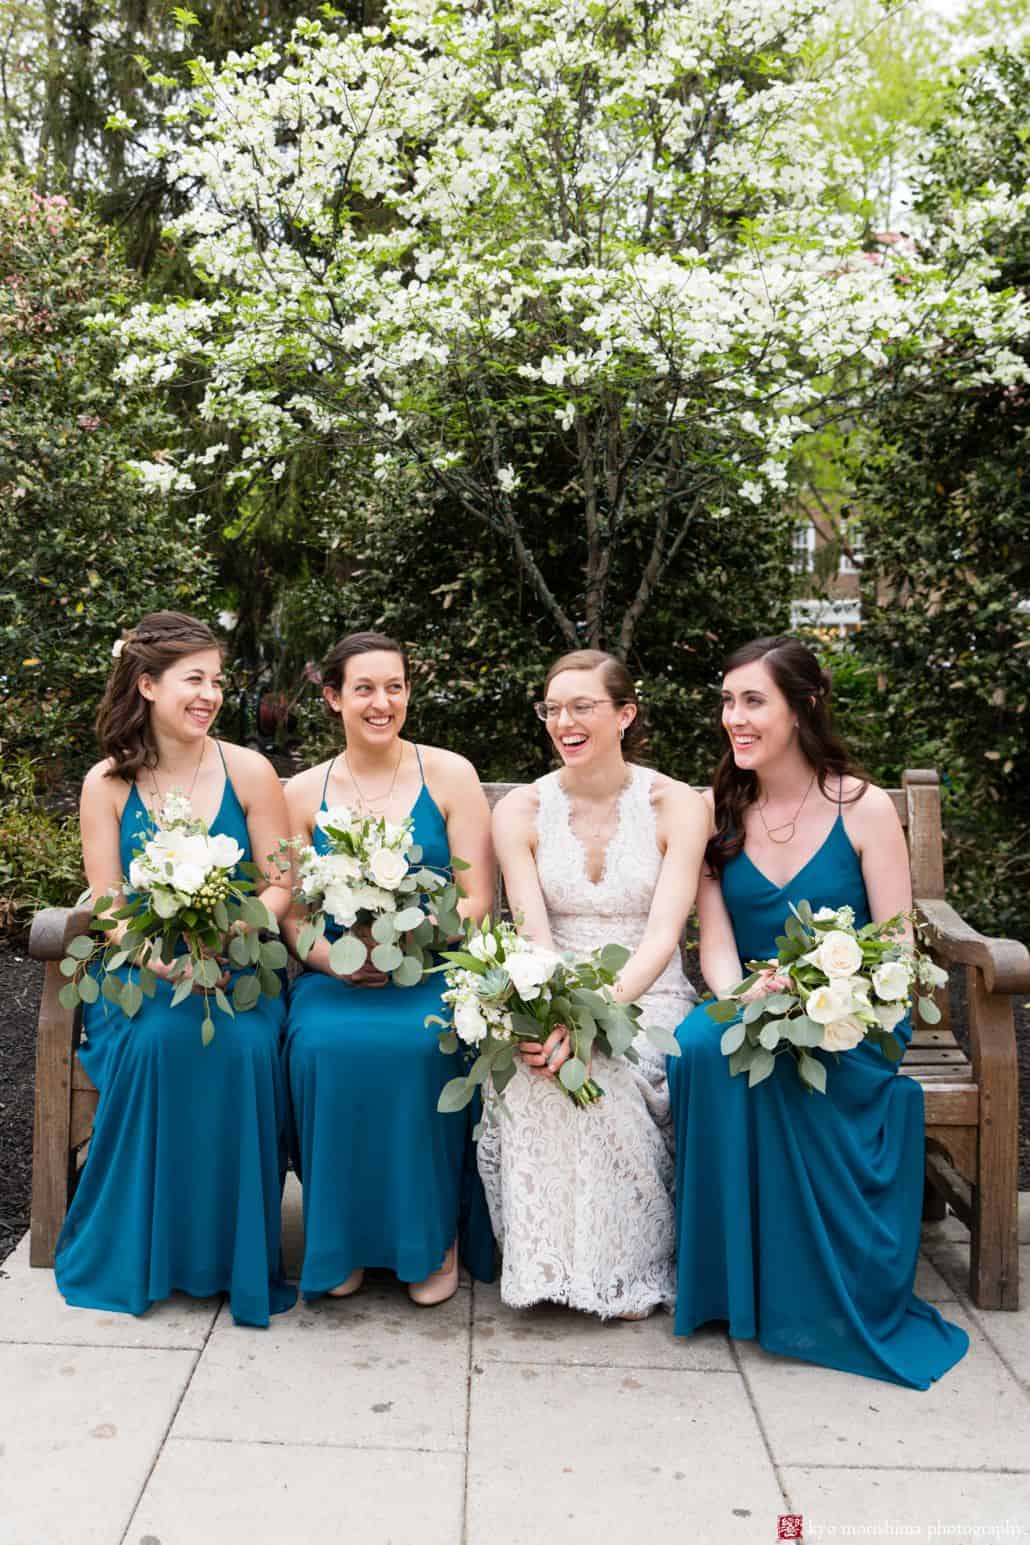 Bridesmaids wearing turquoise Brideside; bride wears BHLDN; all holding bouquets by Bloominous